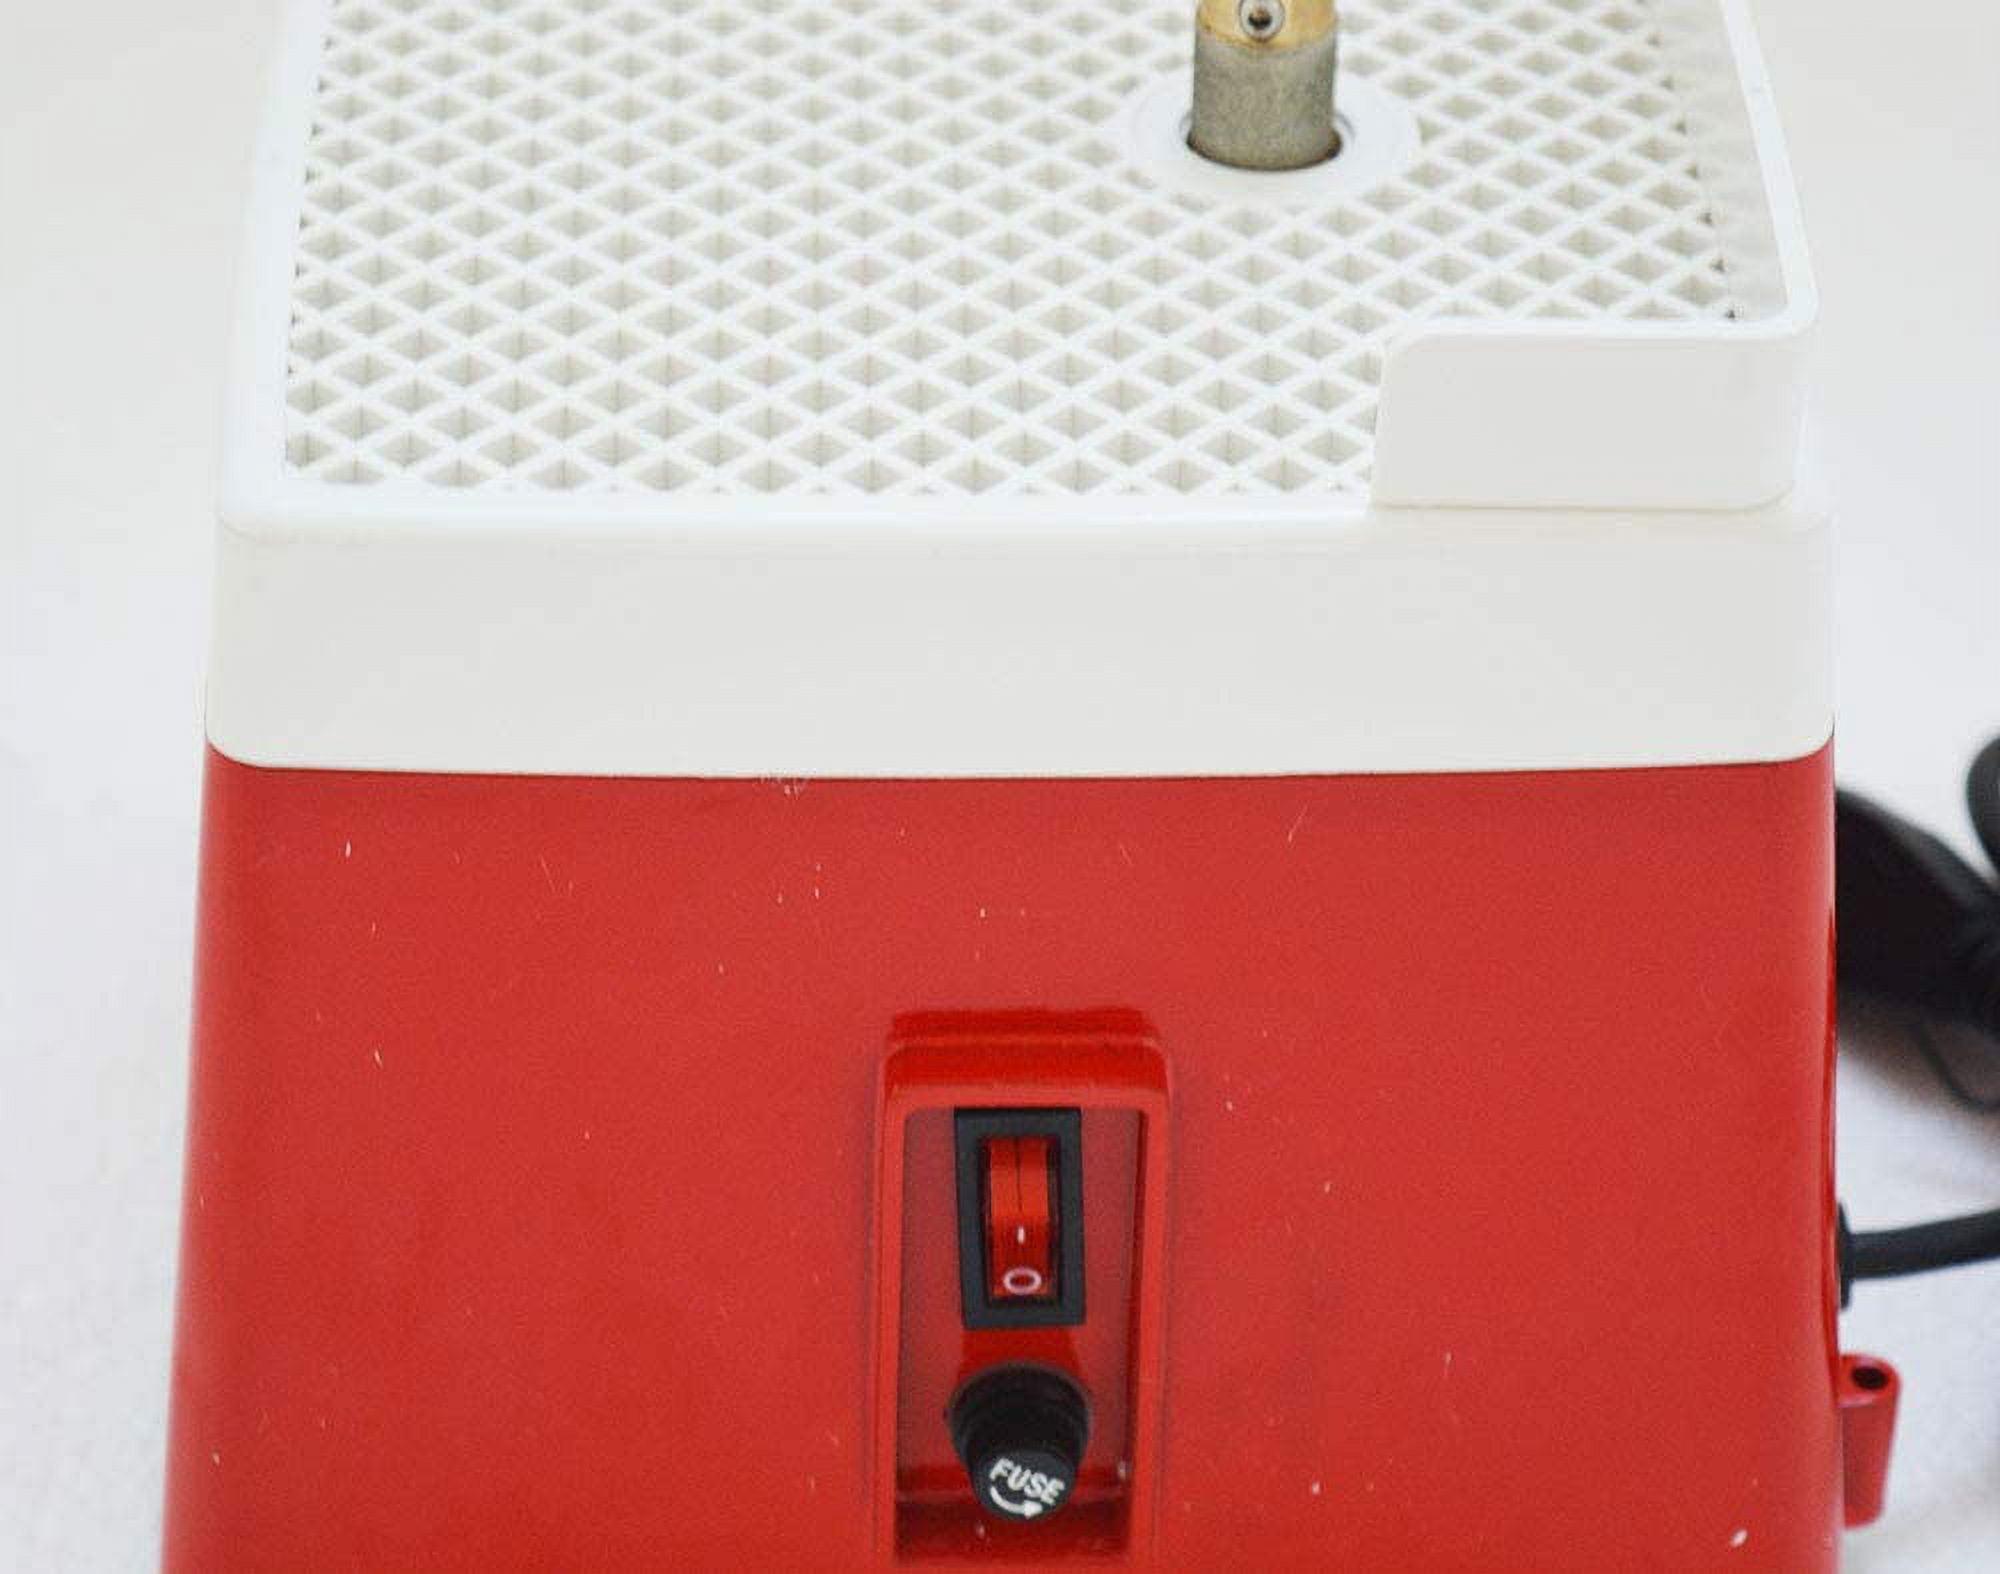 Intbuying 110V Automatic Water Stained Glass Grinder DIY Desktop Grinding Machine, Size: Medium, Red